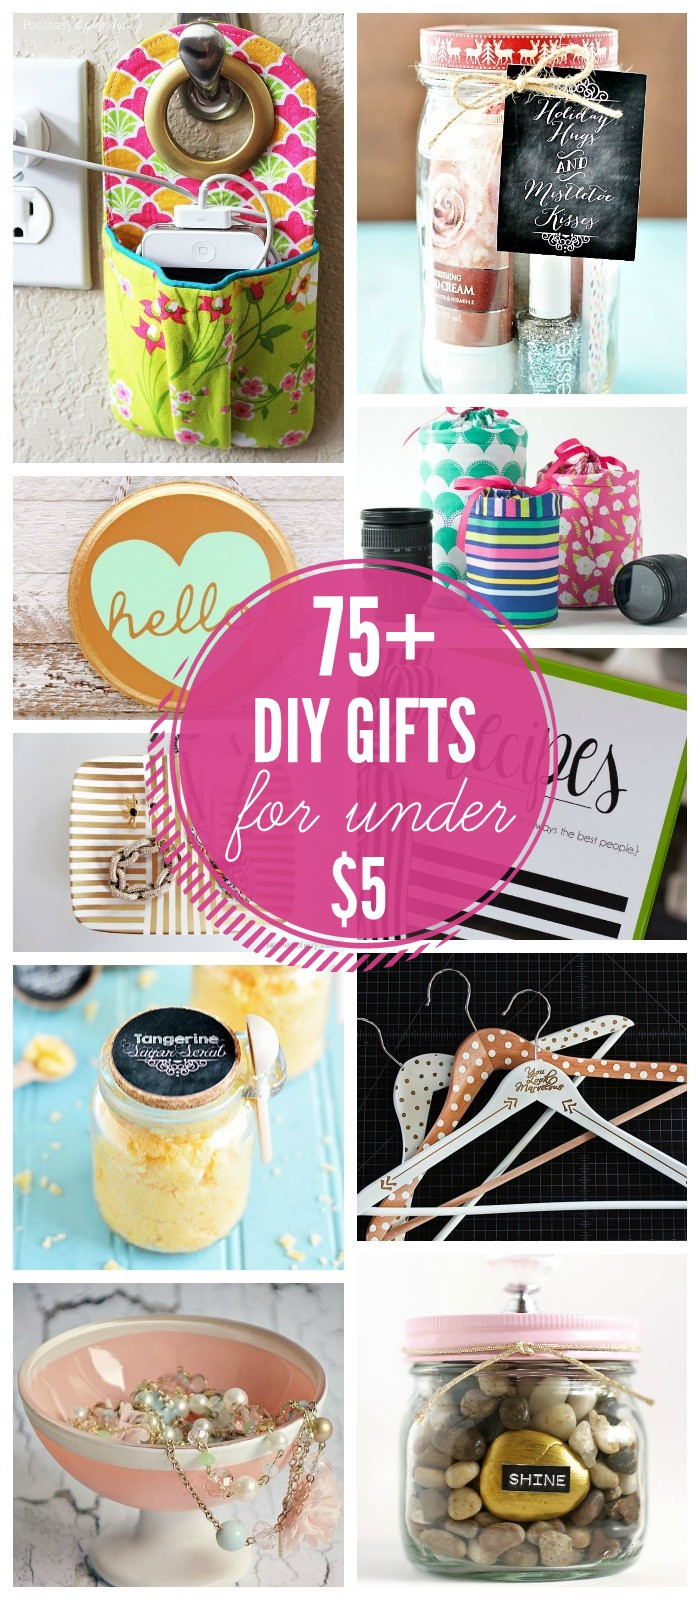 Christmas Gift Ideas Under $5
 The top 20 Ideas About Christmas Gift Ideas Under $5